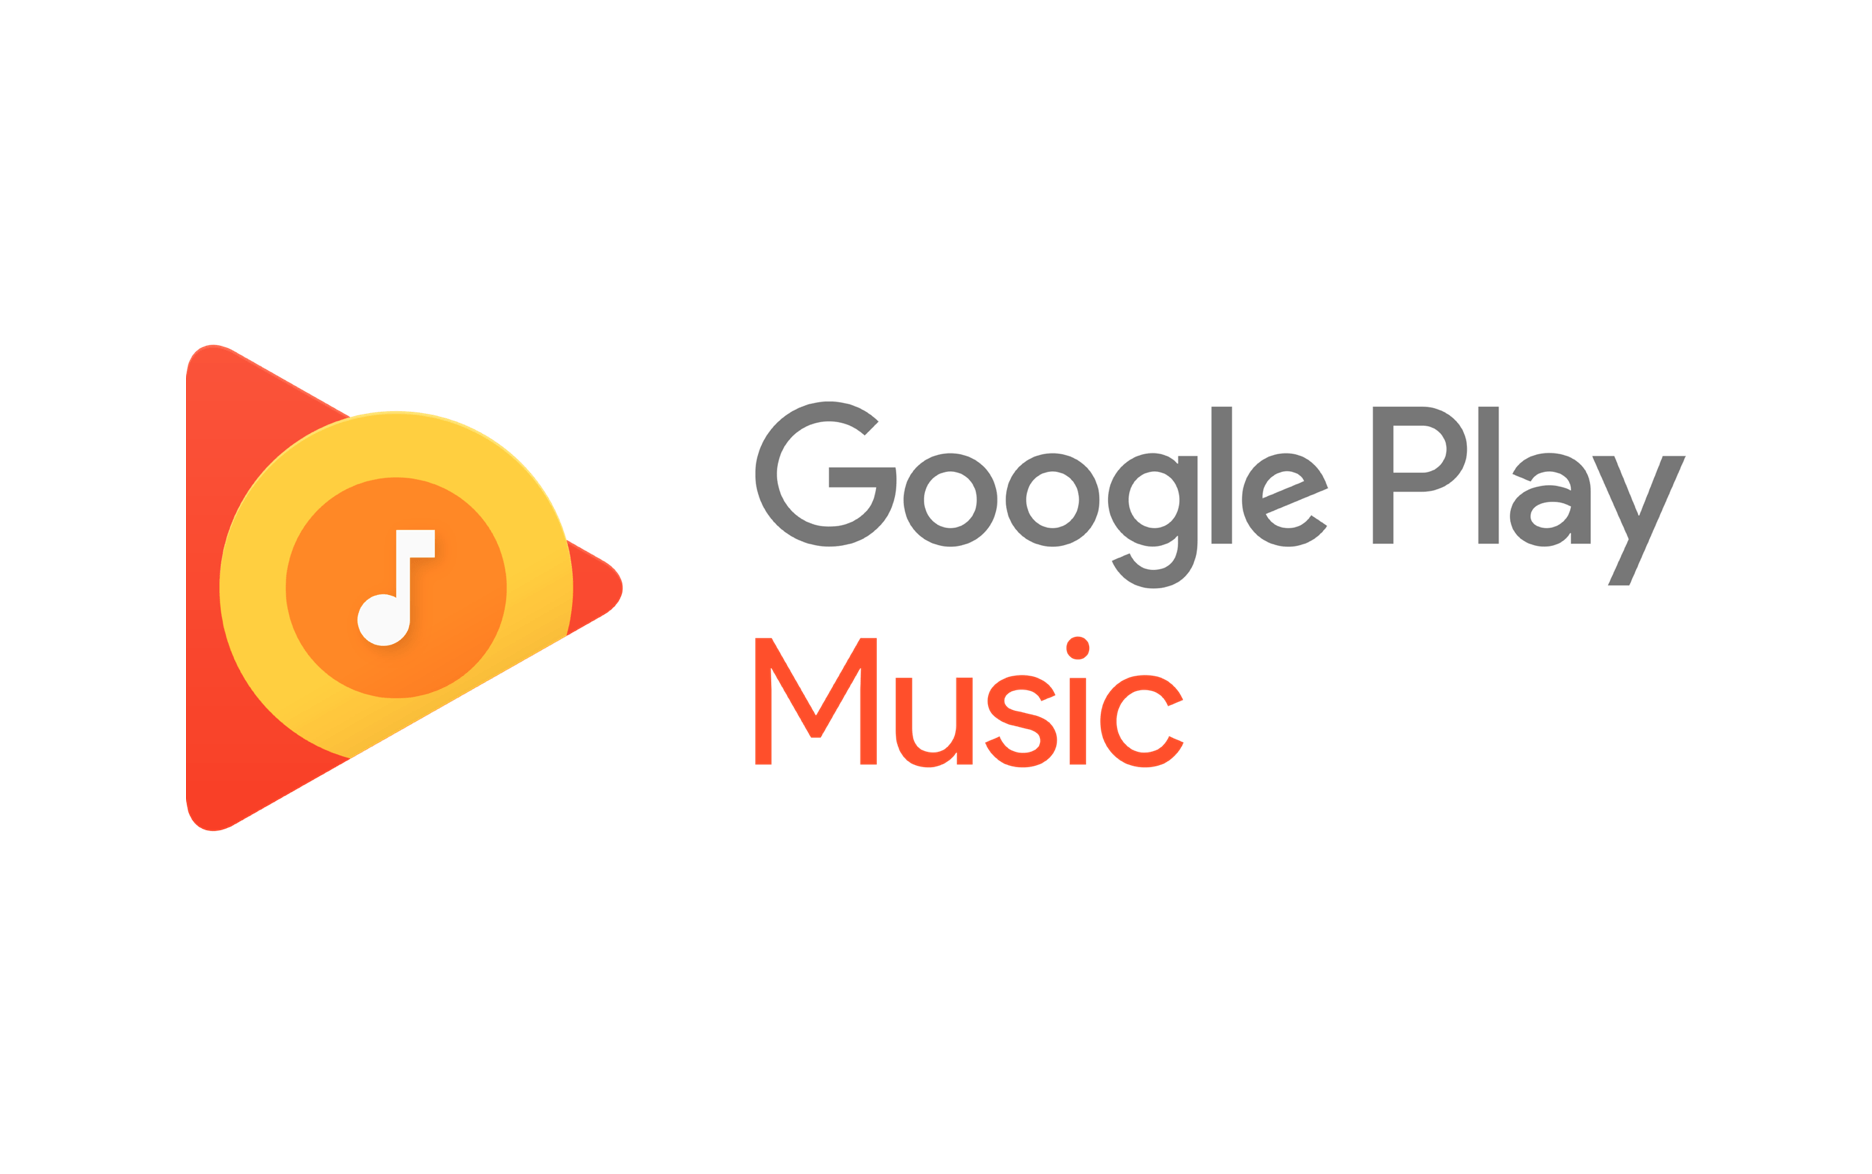 Google Play Podcast Logo - Google one-ups Apple Music with even longer free trial